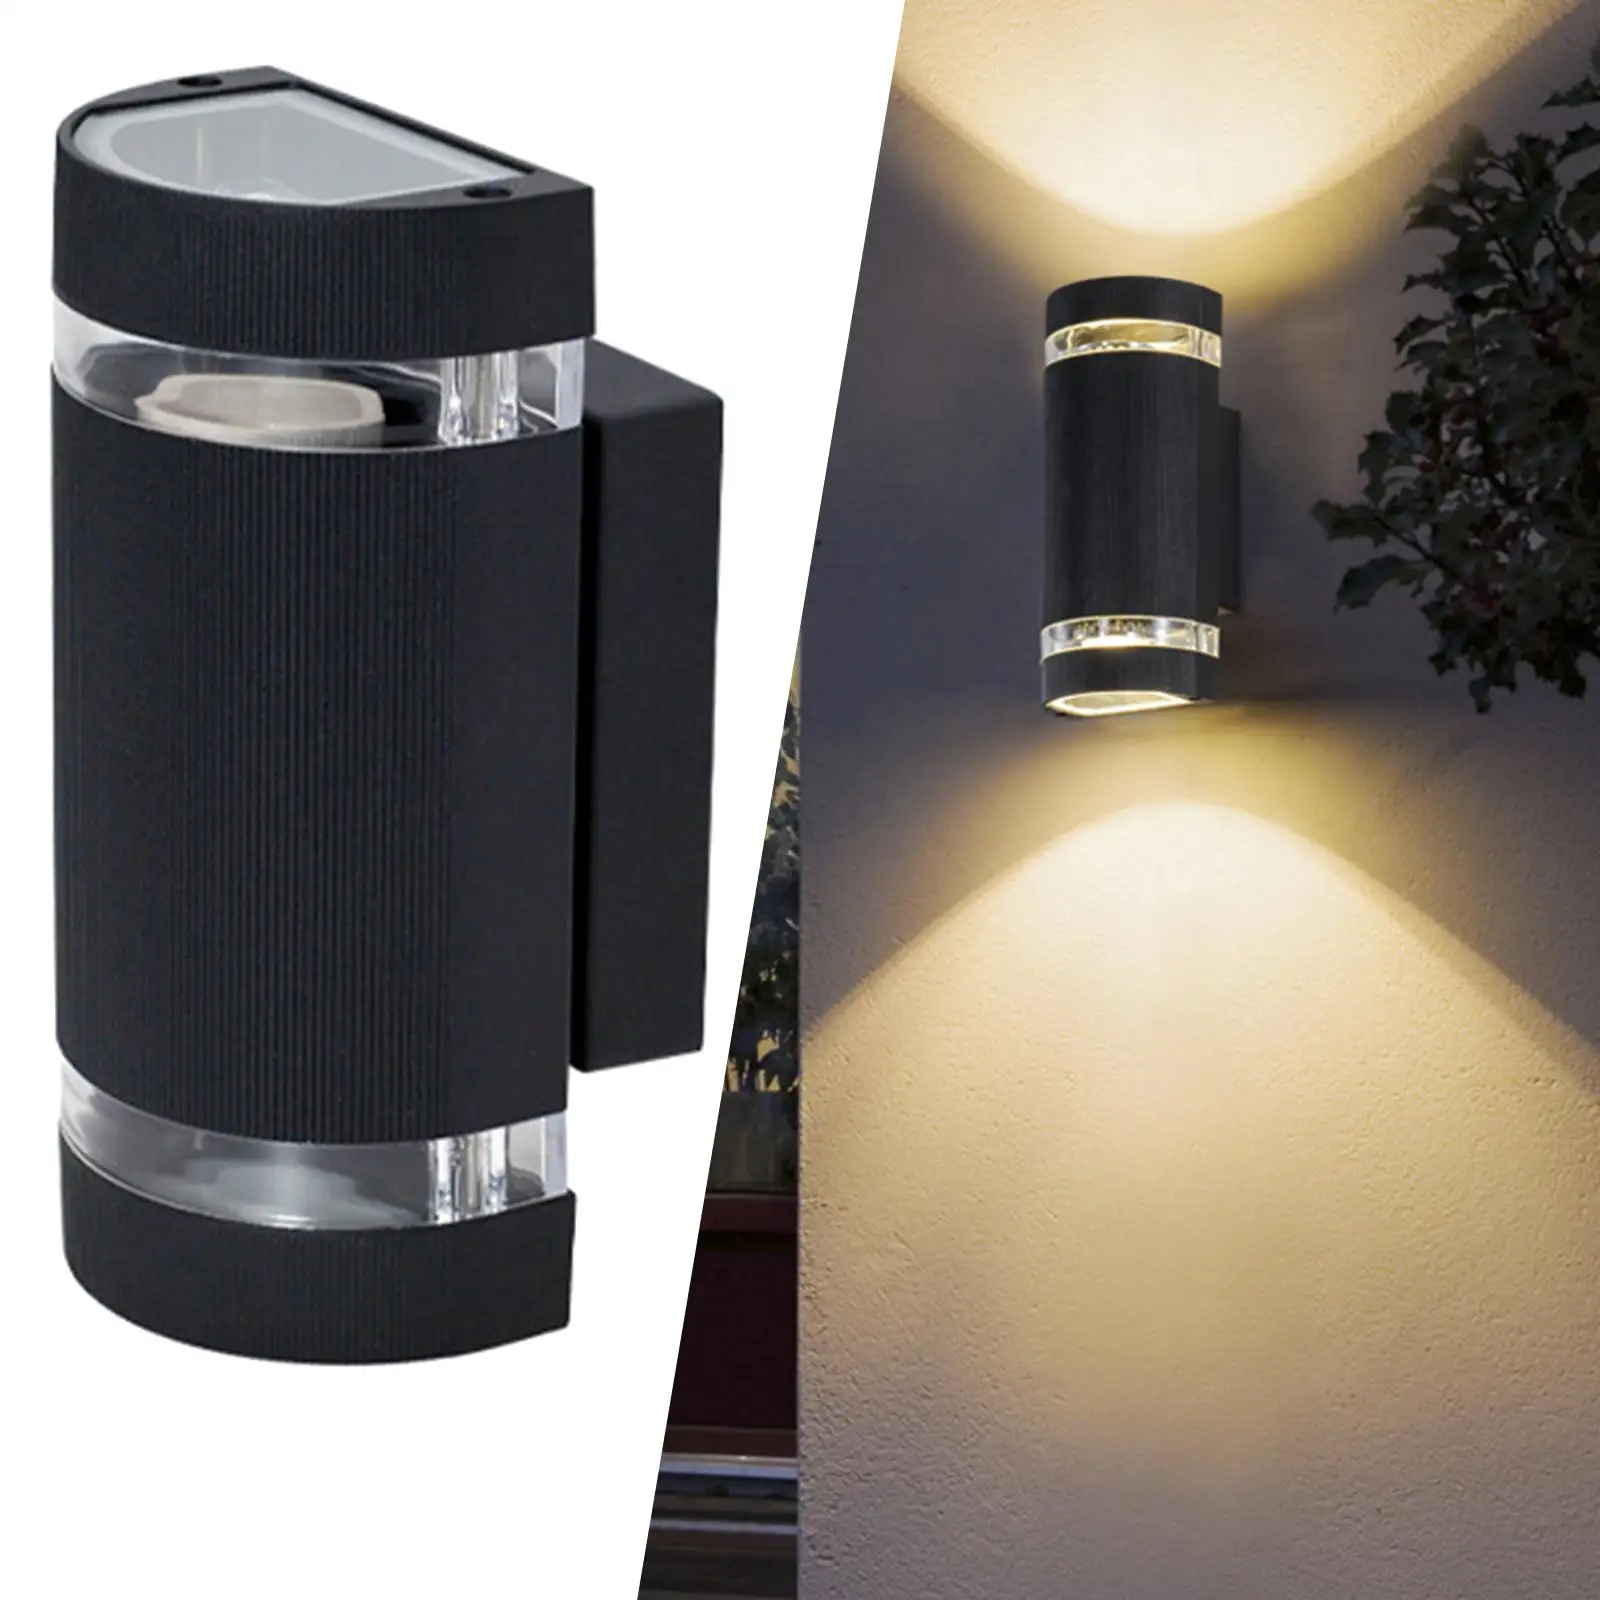 Outdoor LED Wall Lights Water Wall Sconce Lighting E26 Wall Mount Lamp Fixtures for Garden Porch Garage Courtyard